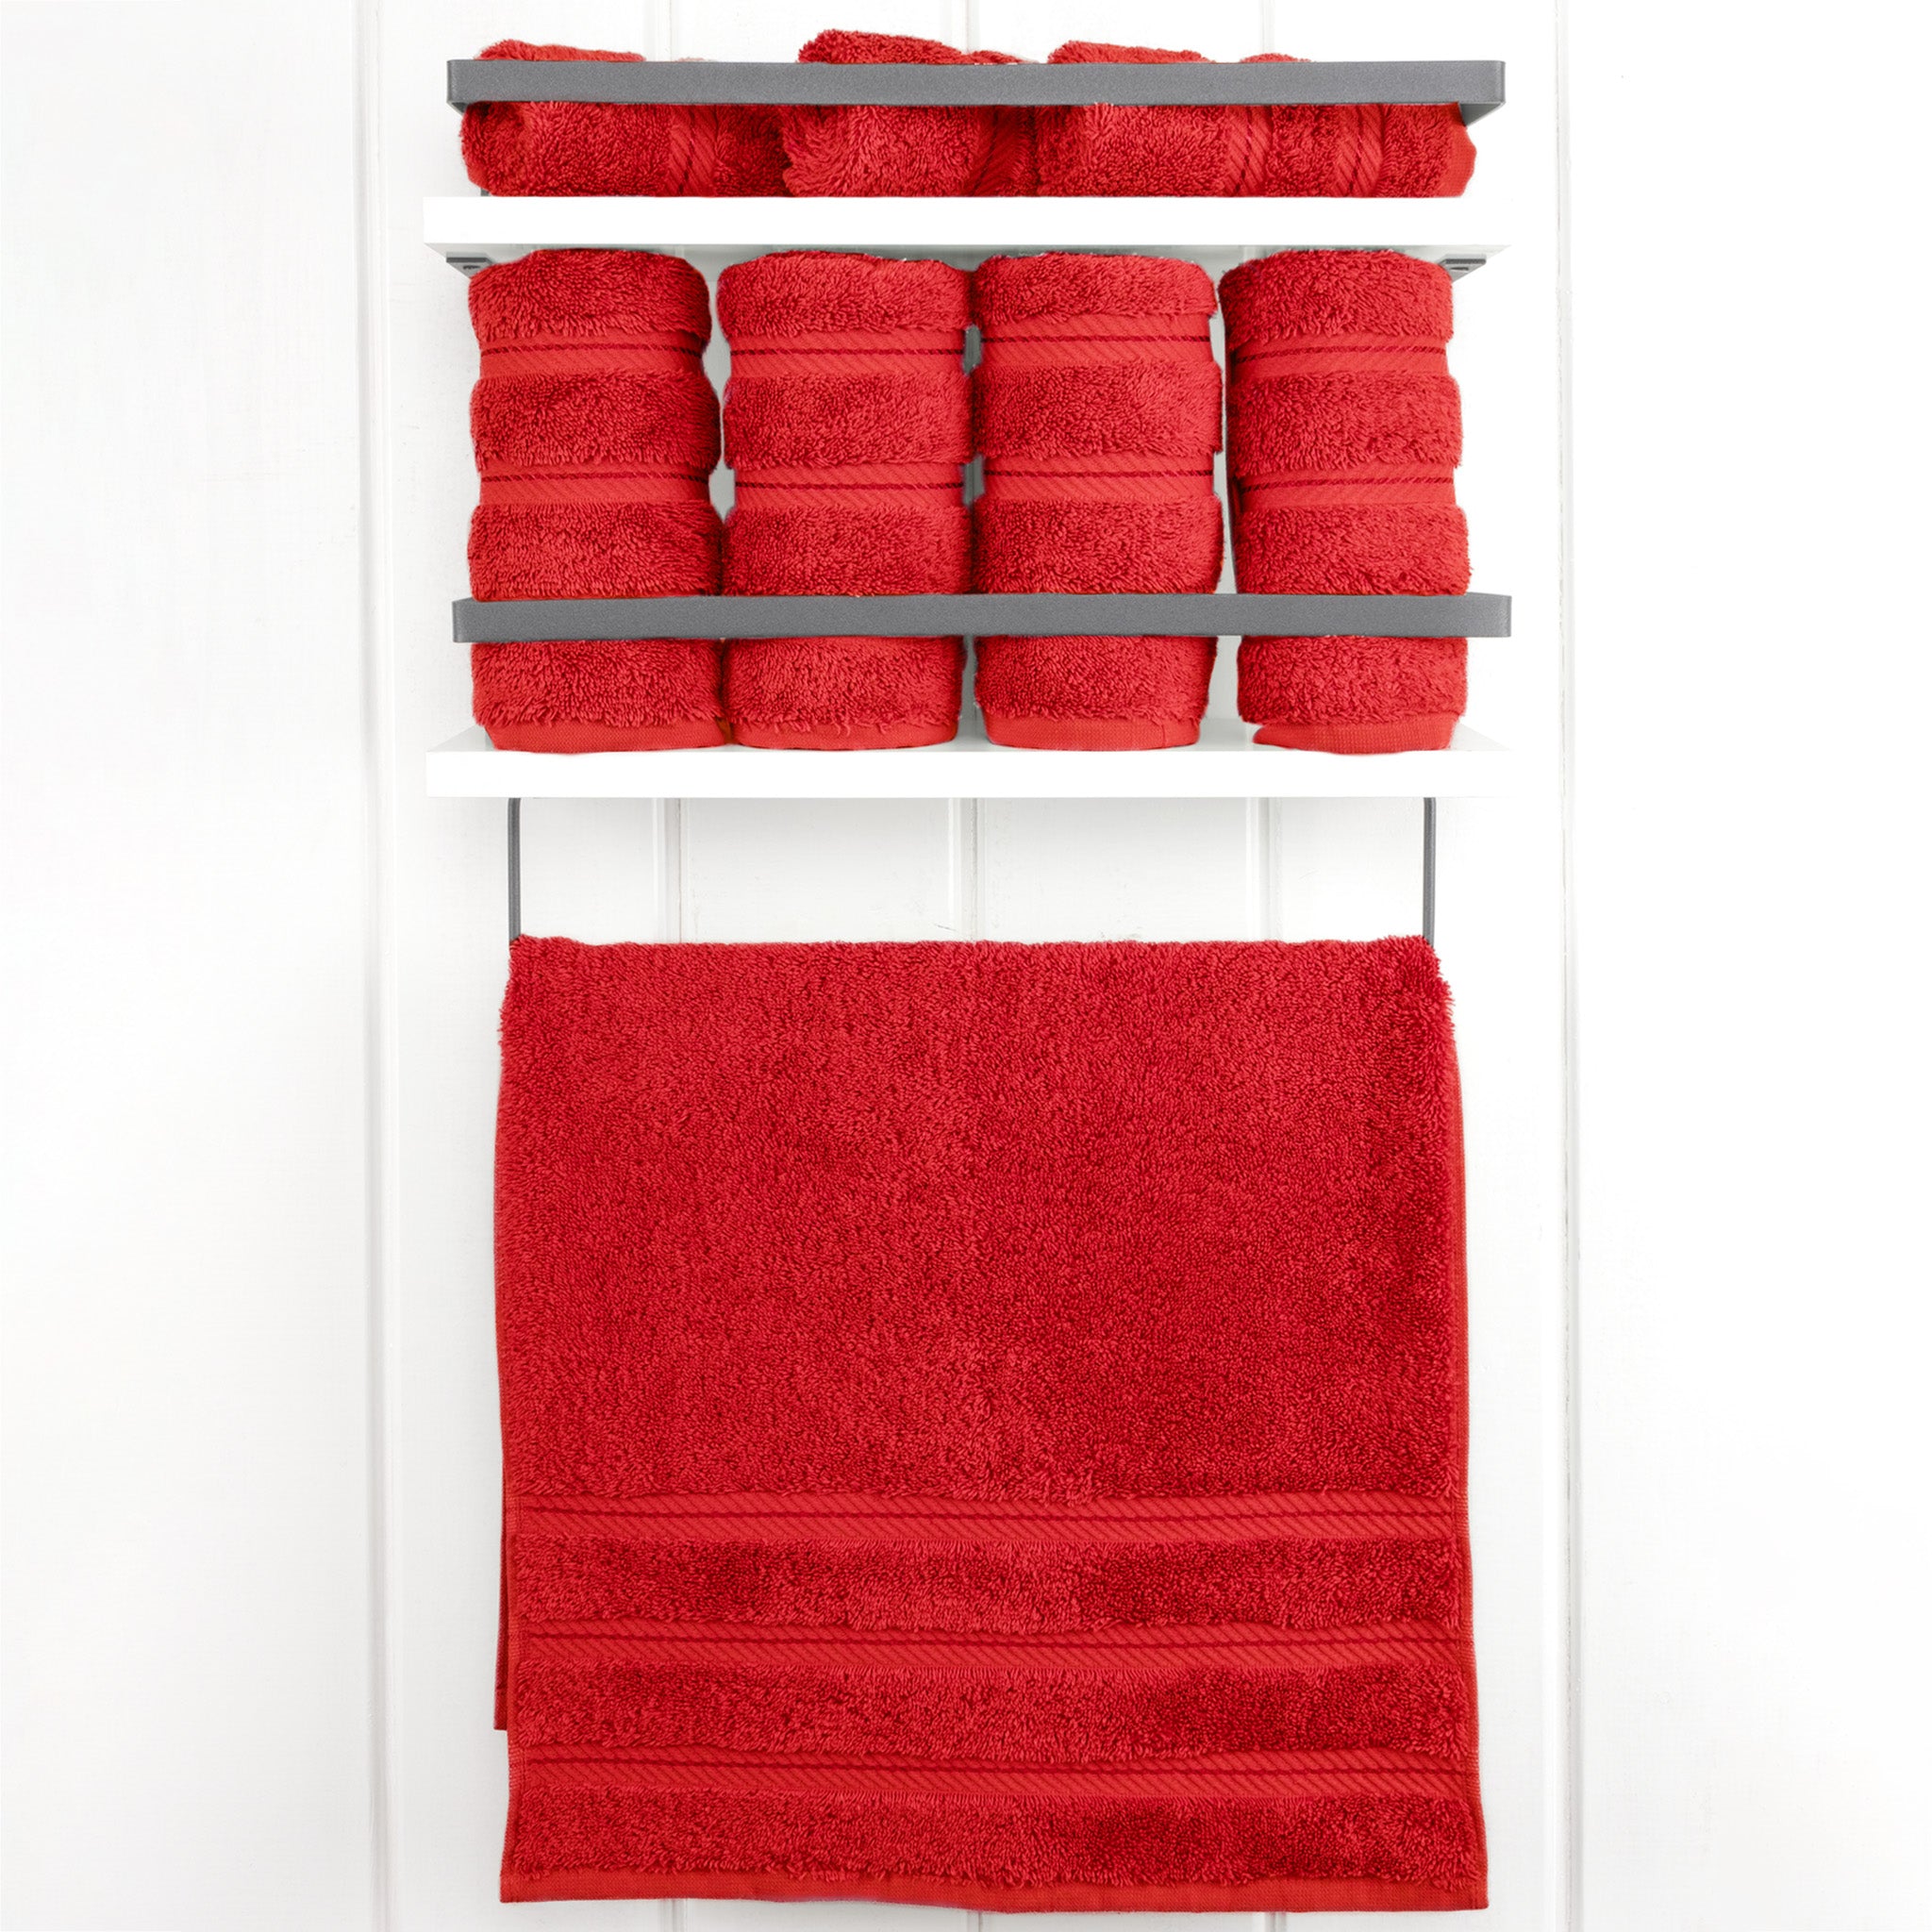 American Soft Linen 100% Turkish Cotton 4 Pack Hand Towel Set Wholesale red-2